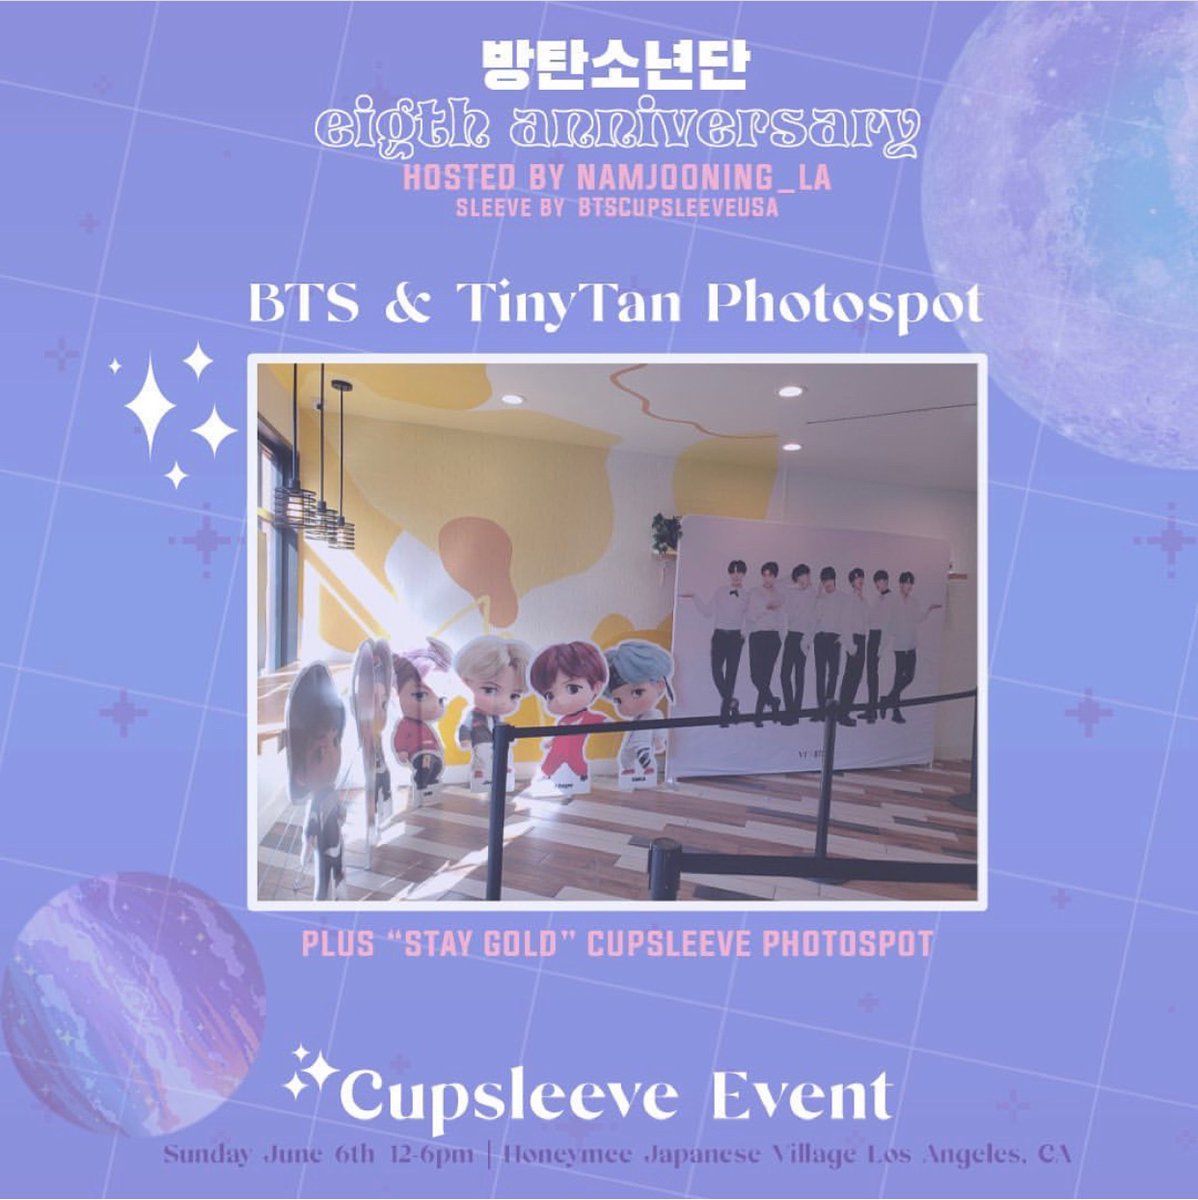 Did you know I did fan art? Prepared a giveaway for BTS’ 8th Anniversary. Available in limited quantities at cupsleeve events in US. First event: Los Angeles. 
@BTSCupsleeveUSA @namjooning_la 
@BTS_twt https://t.co/85XM22wQ9R